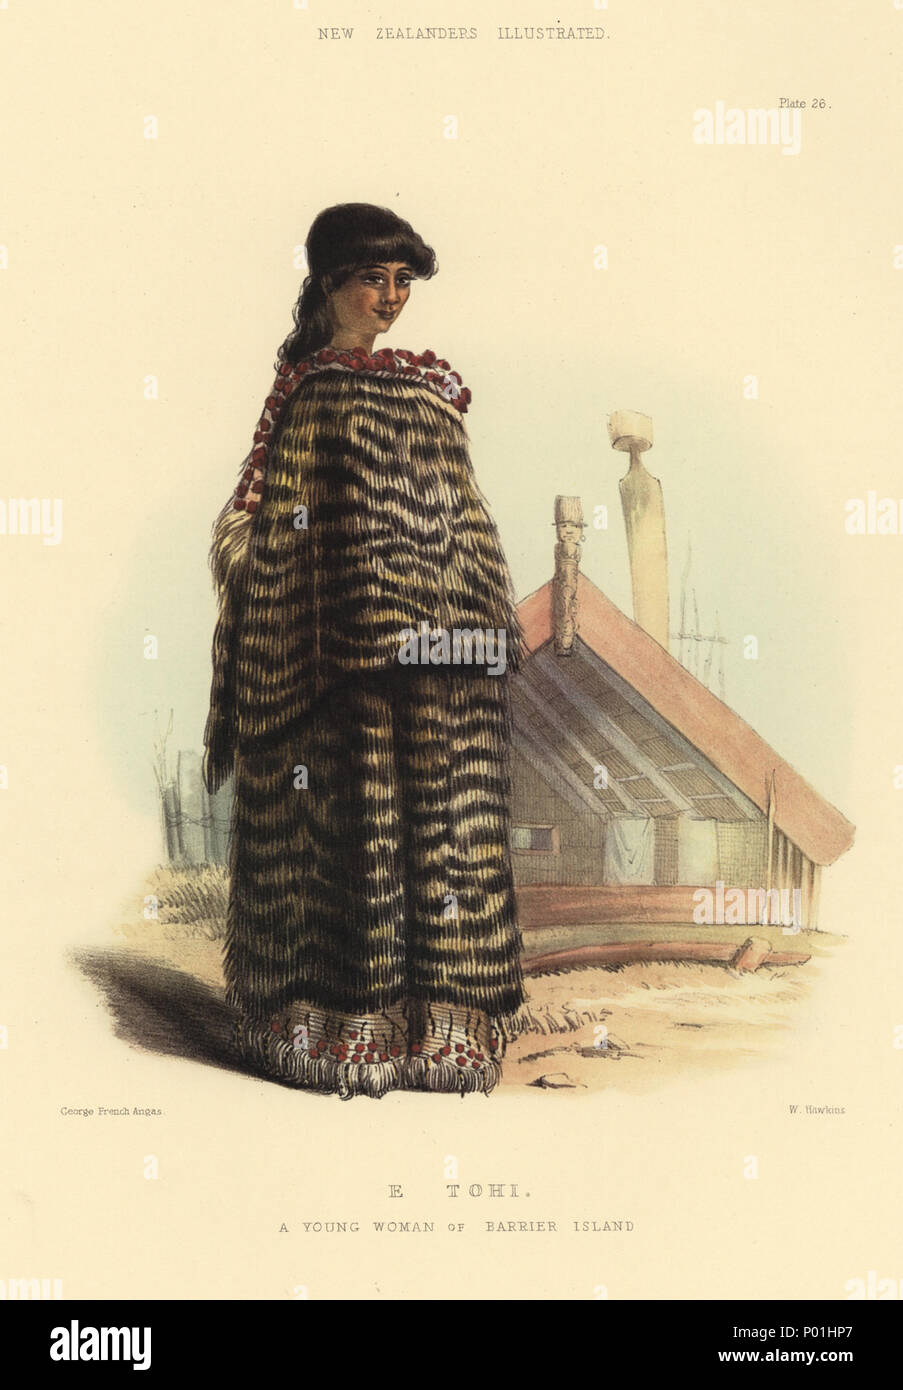 . English: E TOHI. A YOUNG WOMAN OF BARRIER ISLAND. [Image of page 63] PLATE XXVI. E TOHI, A YOUNG WOMAN OF BARRIER ISLAND. THIS portrait shews the manner in which the hair is usually worn over the forehead by the unmarried girls of New Zealand. The dress consists of a magnificent Kakahu of strings of rolled flax, dyed black at alternate intervals^ and bordered at the top by bosses of scarlet wool; this is worn over a finer description of garment, also made entirely of flax, and ornamented with rolled strings and tufts of wool. Although formerly the natives used feathers for the decorations of Stock Photo